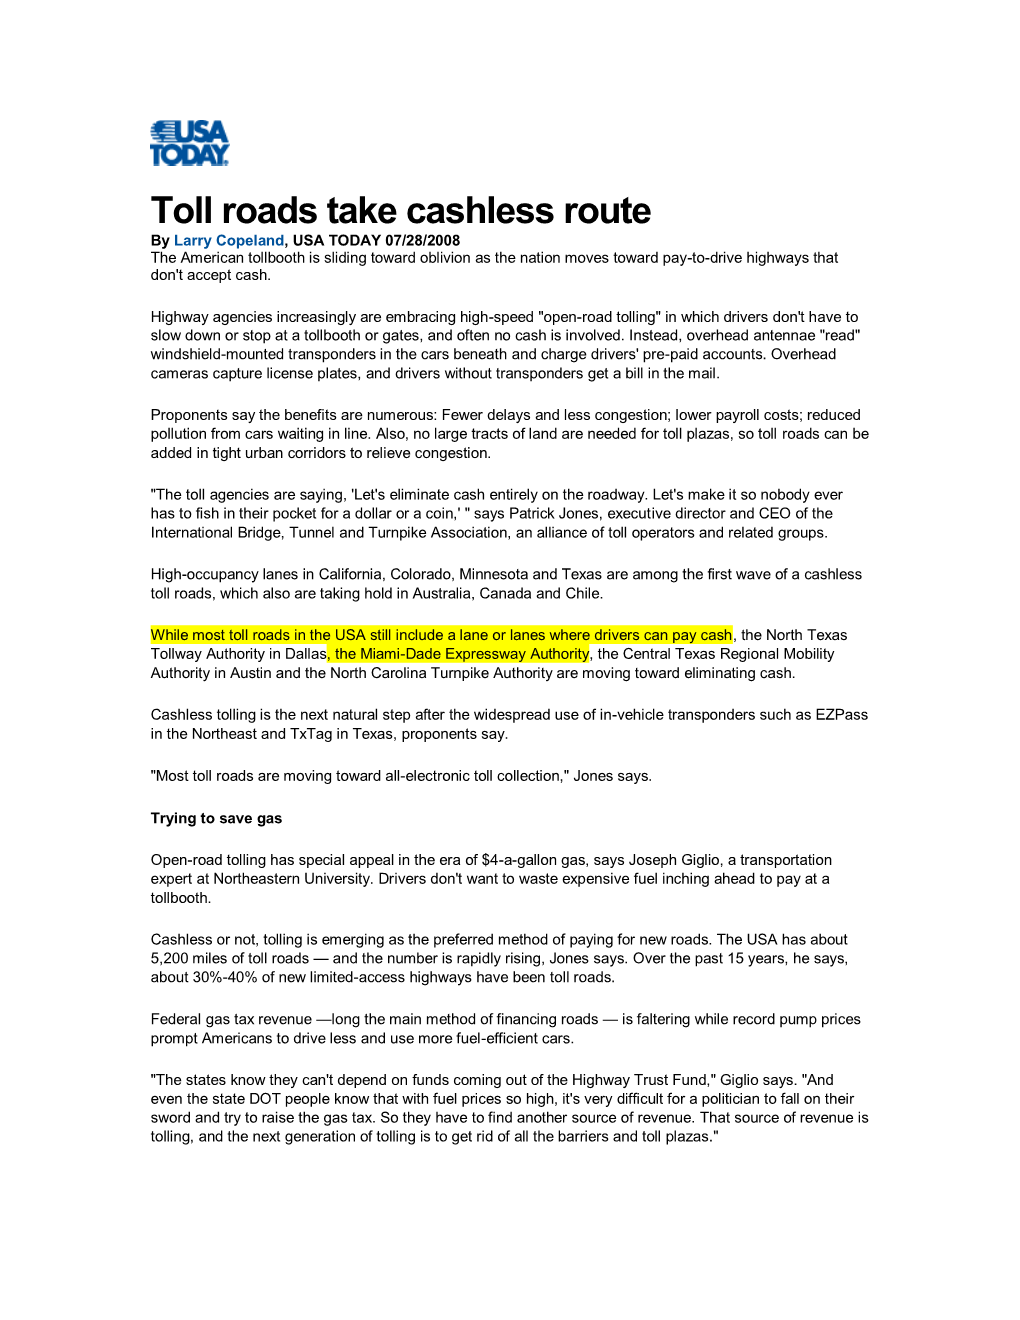 Toll Roads Take Cashless Route